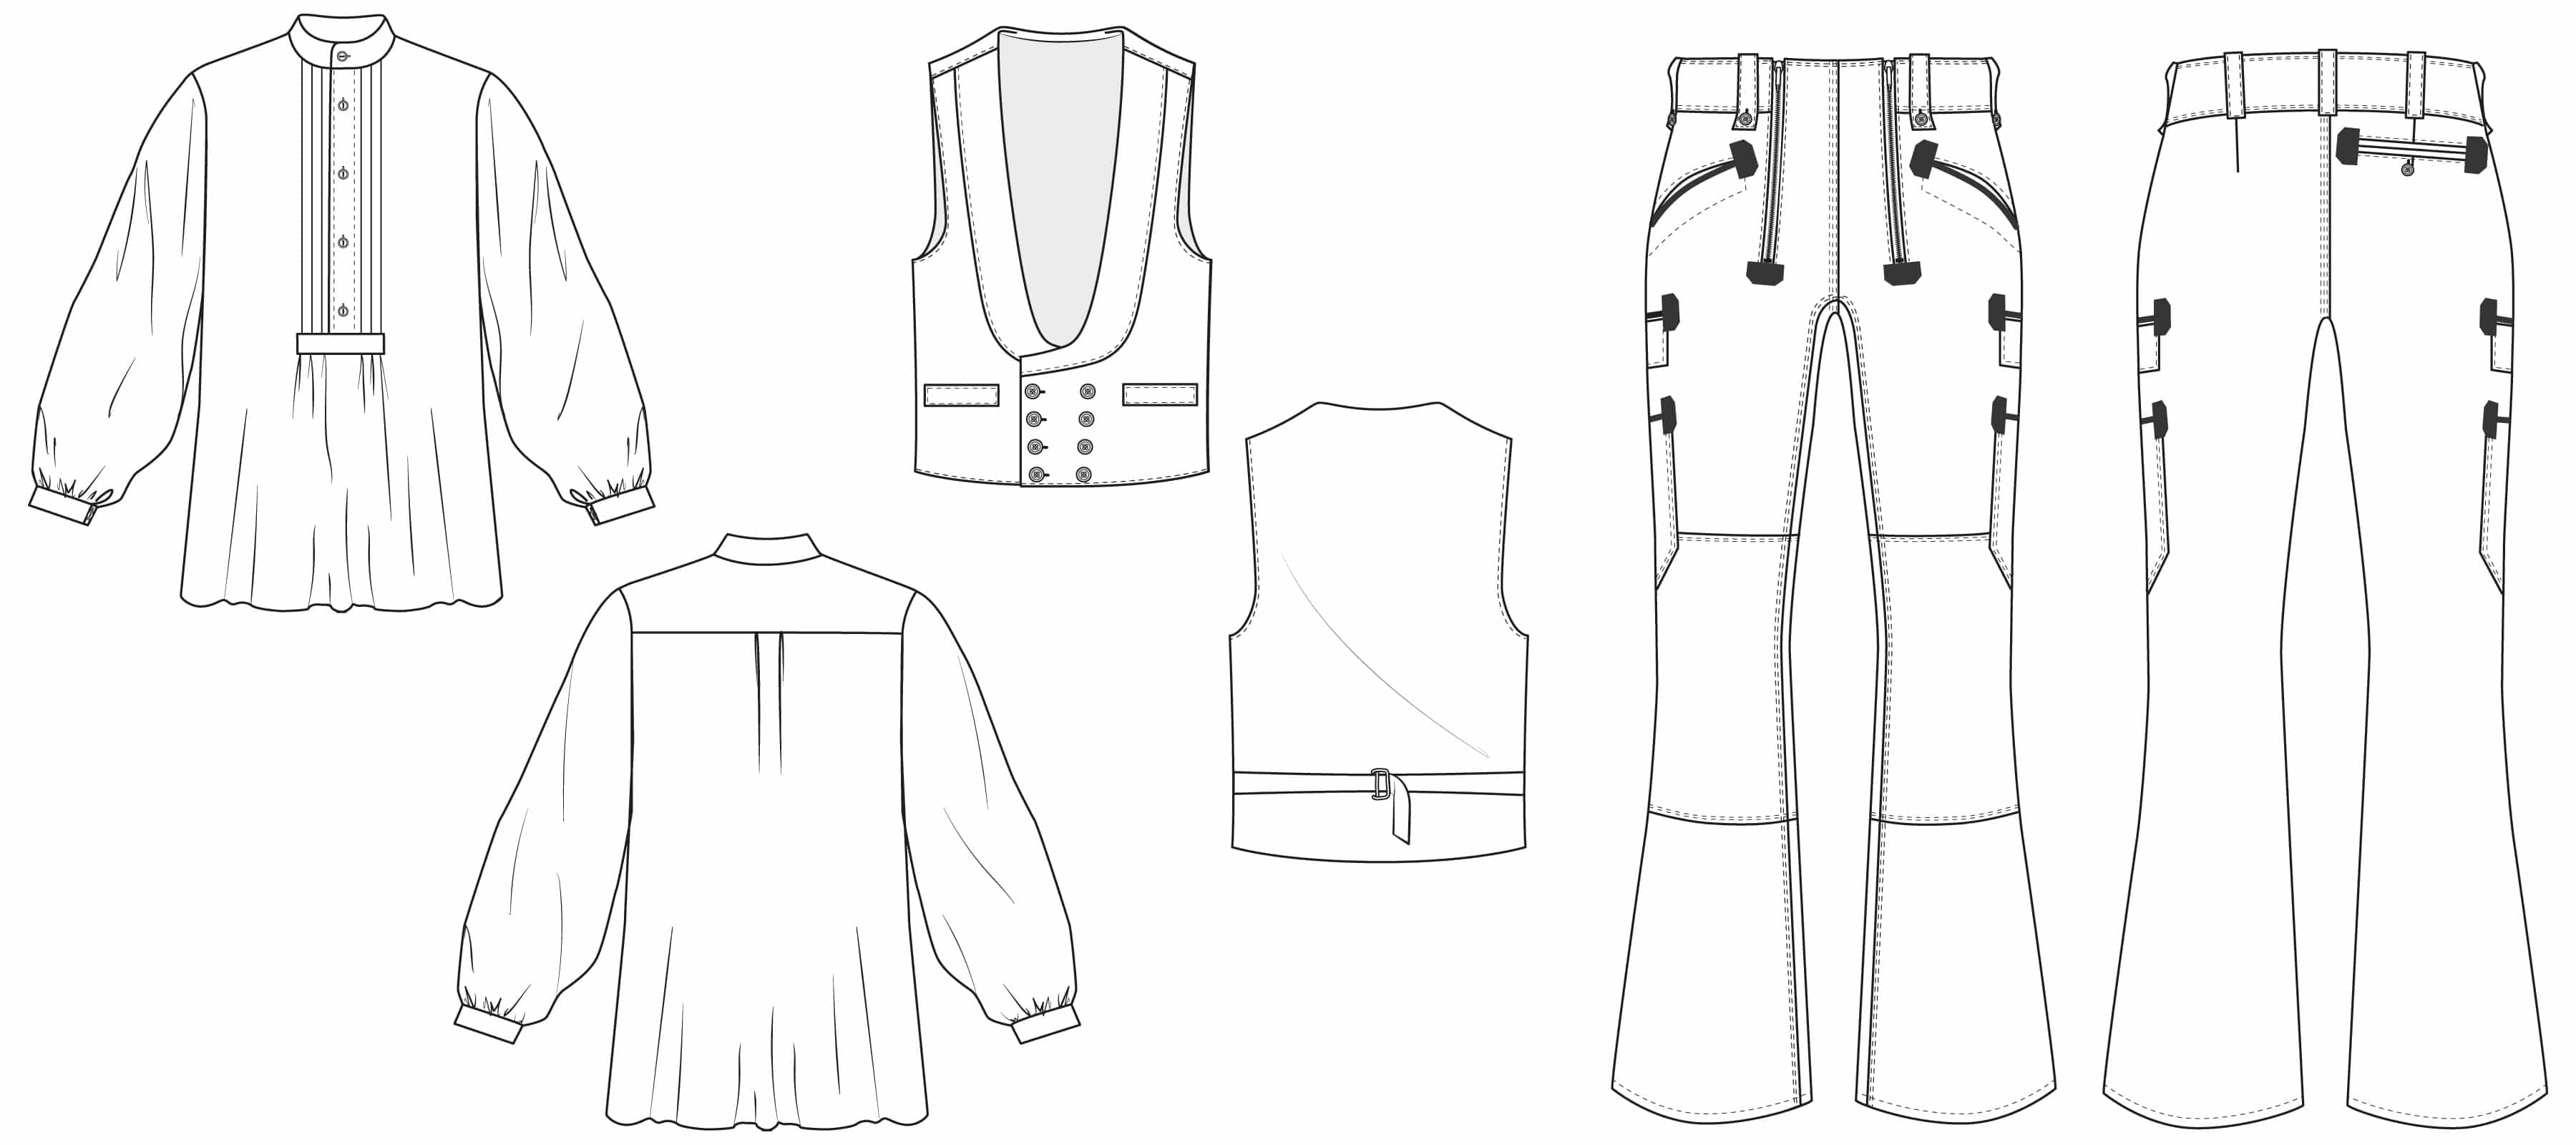 overview of the guild clothing